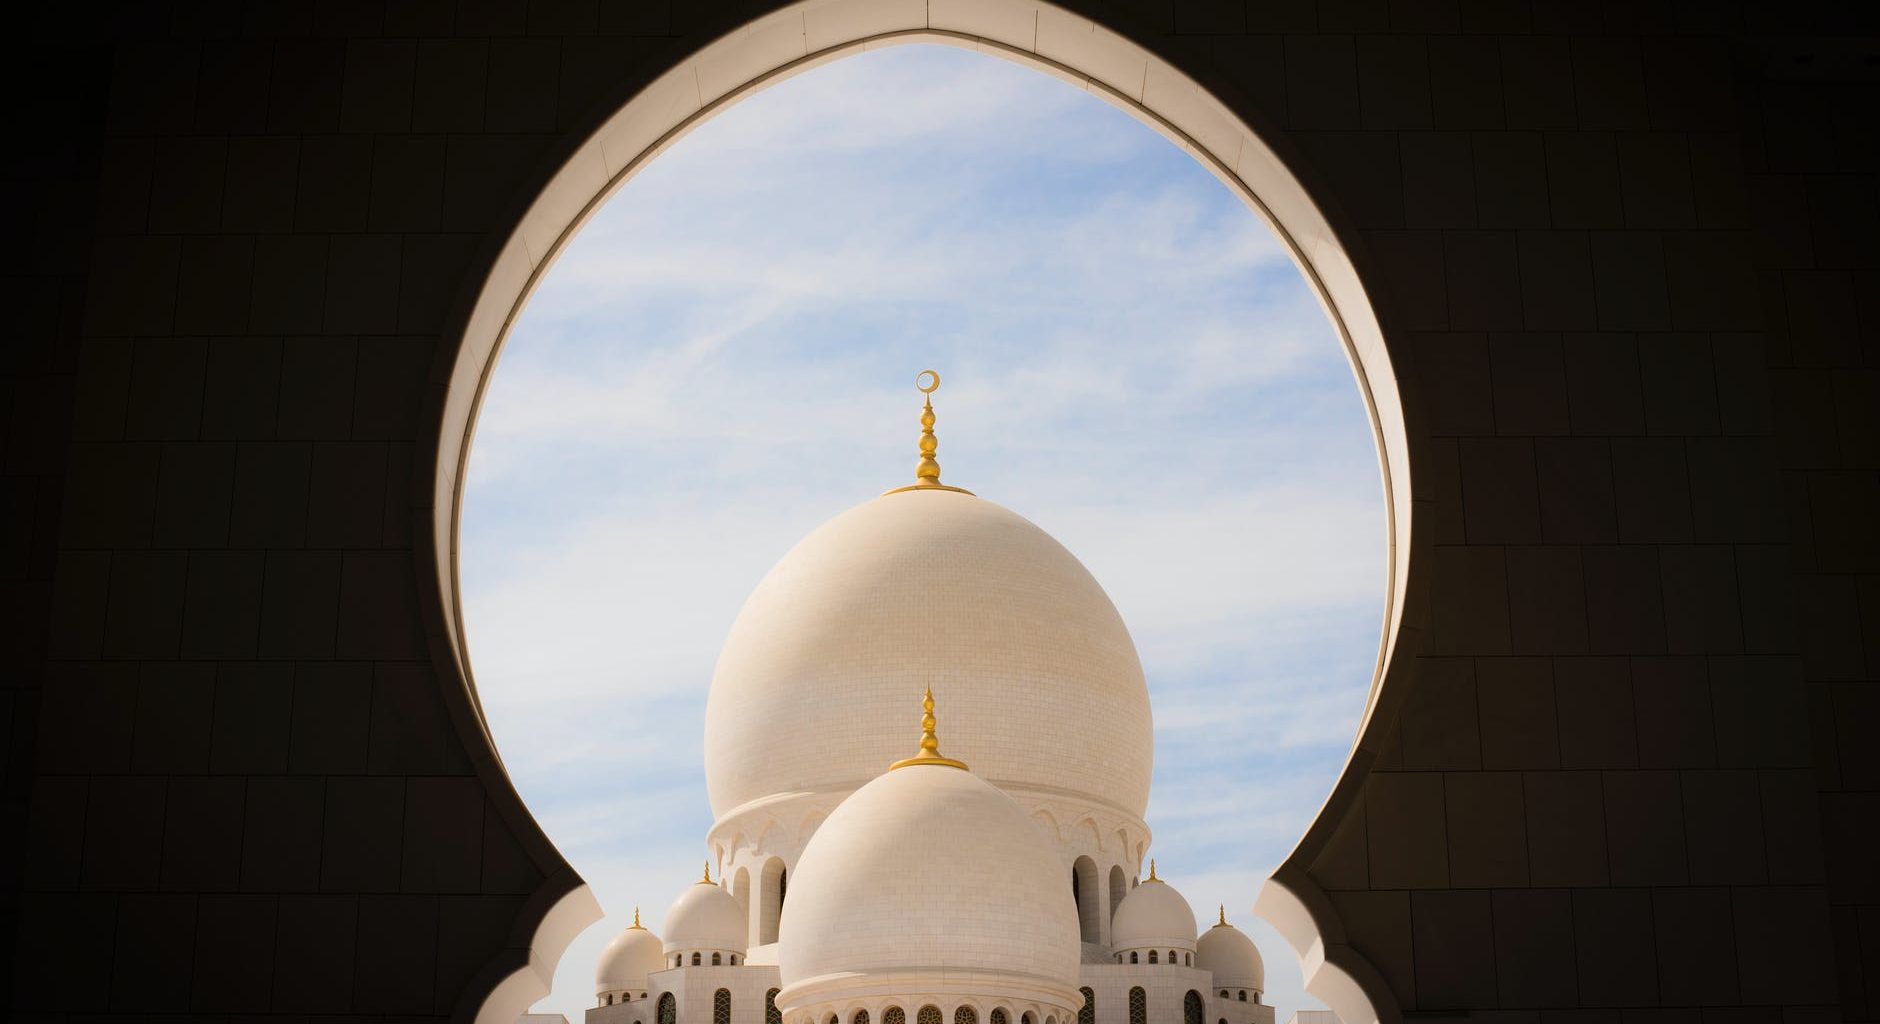 photo of sheikh zayed grand mosque center during daytime